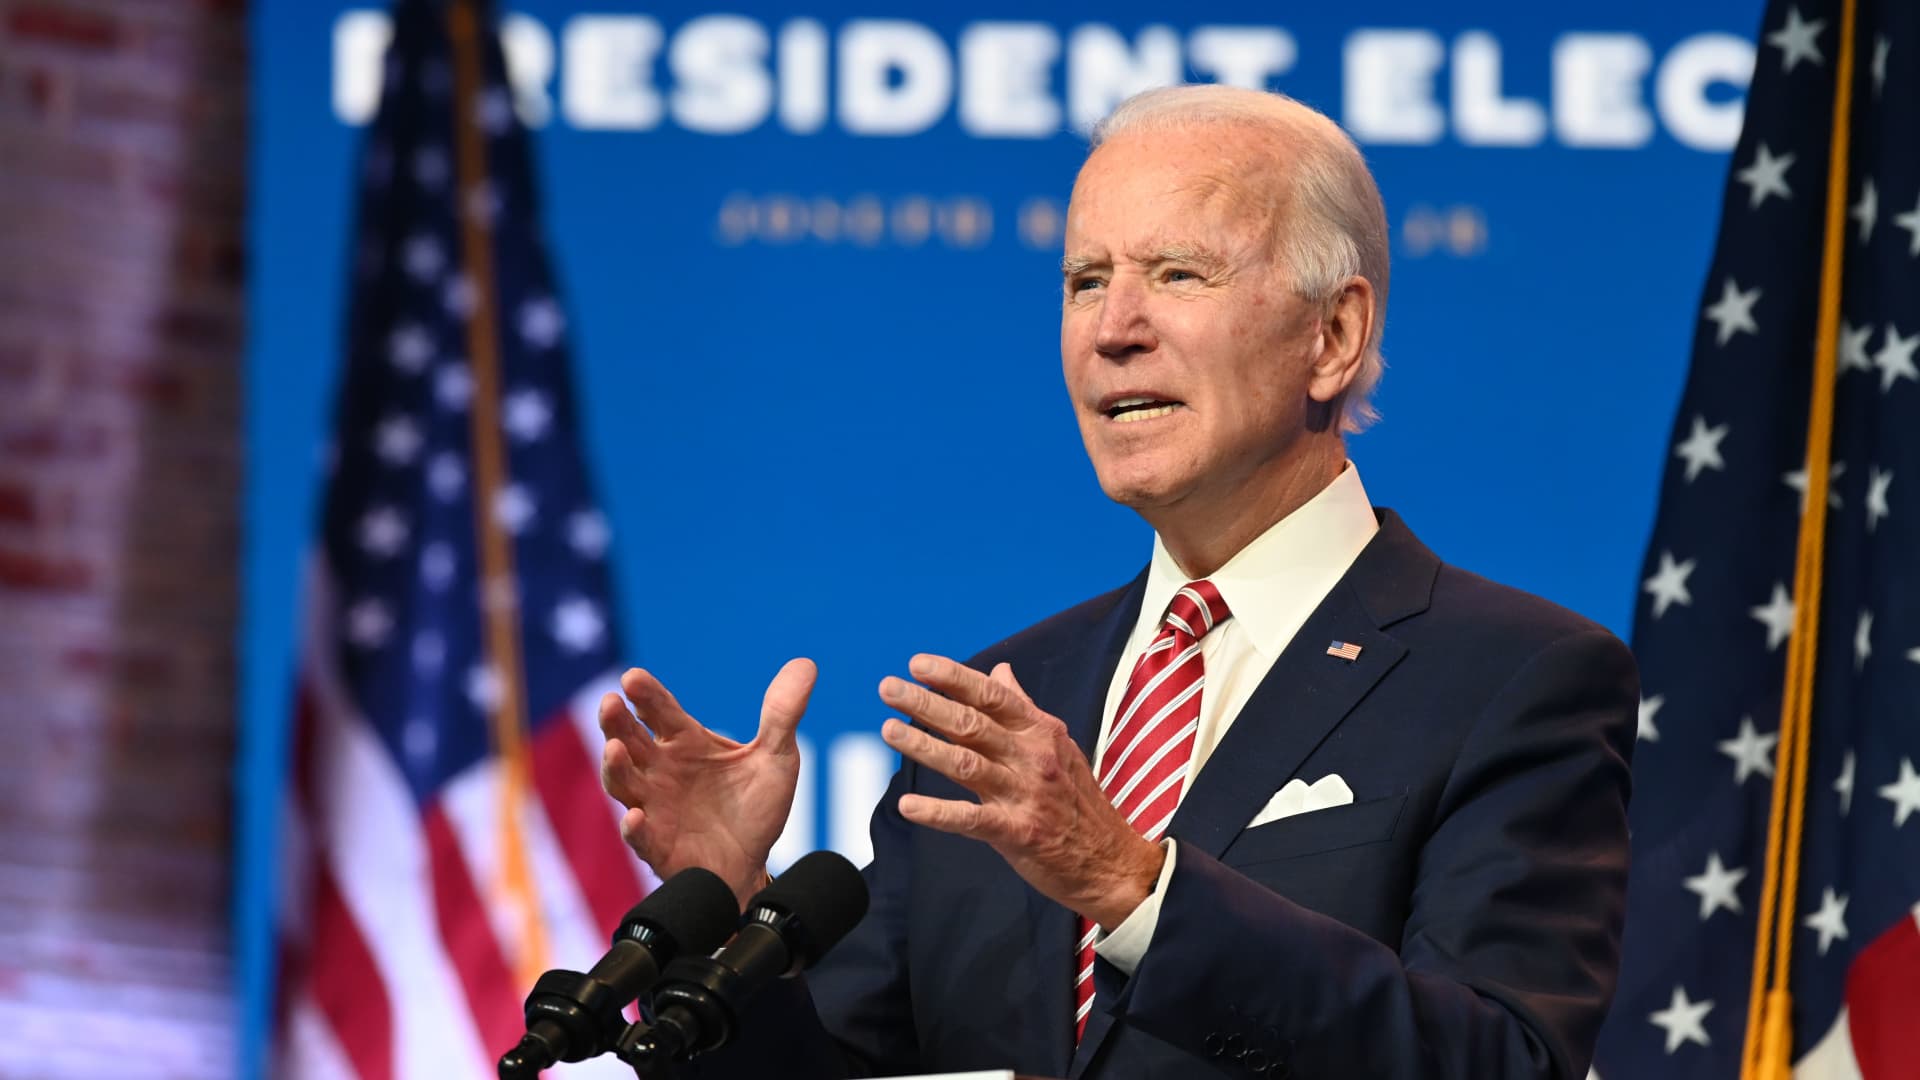 US President-elect Joe Biden speaks during a press conference at The Queen in Wilmington, Delaware on November 16, 2020.